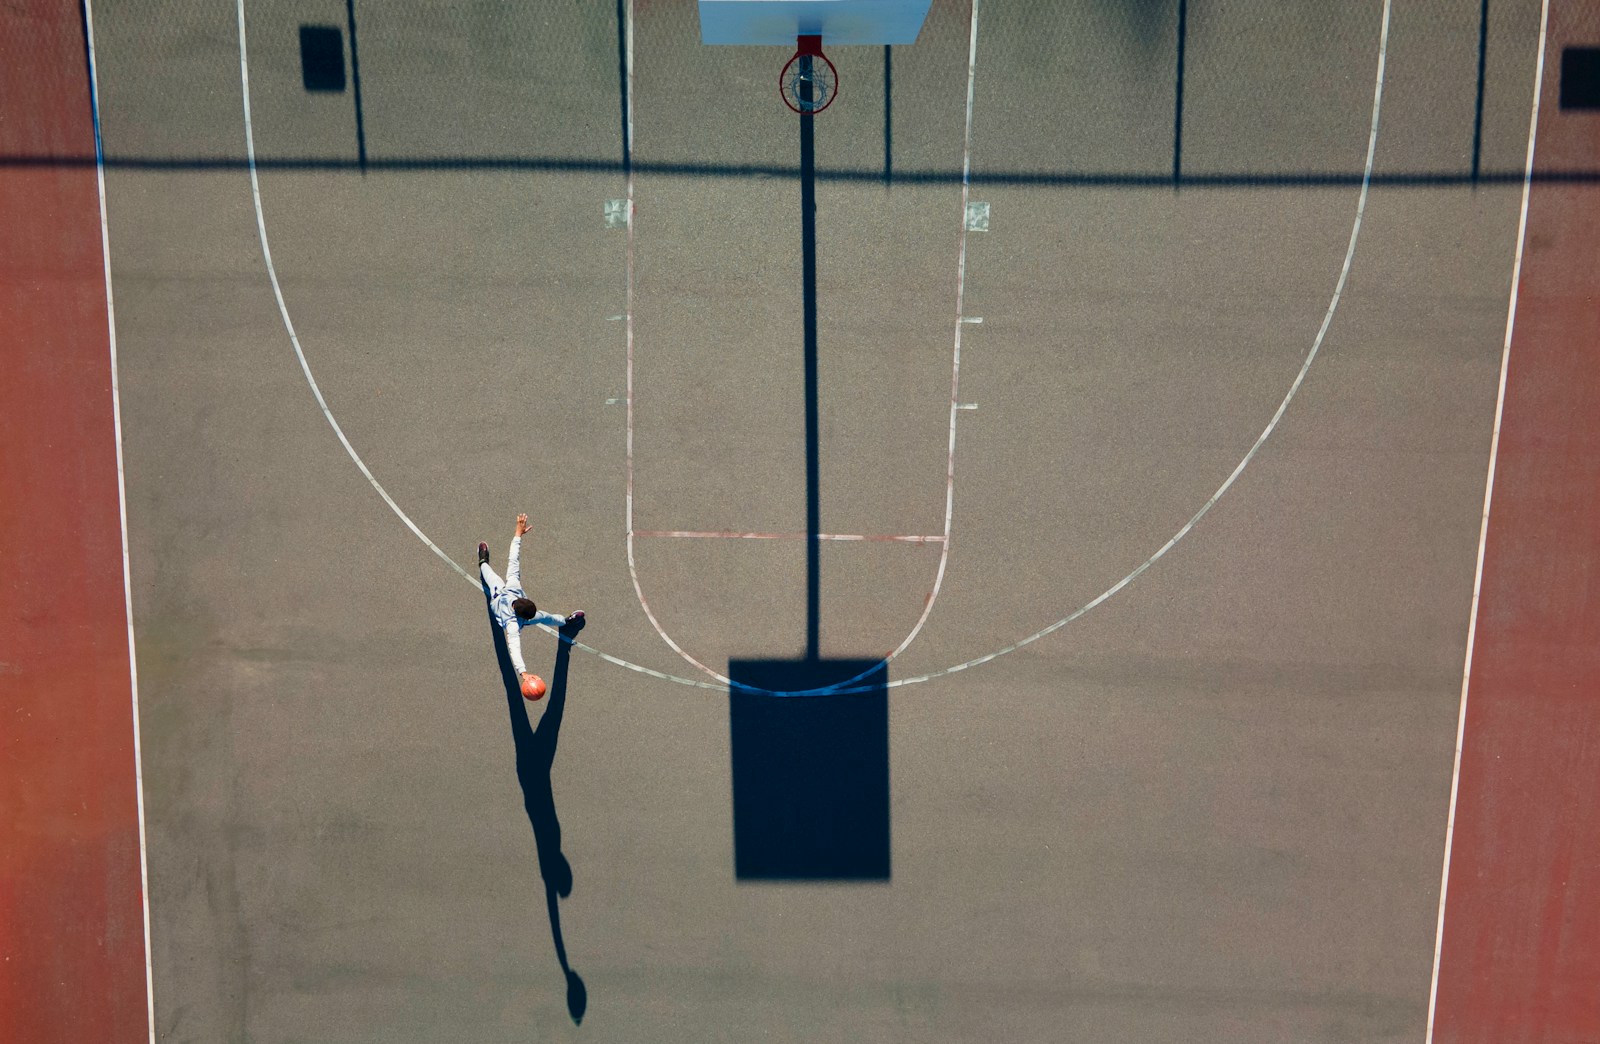 an overhead view of a basketball court with a basketball hoop